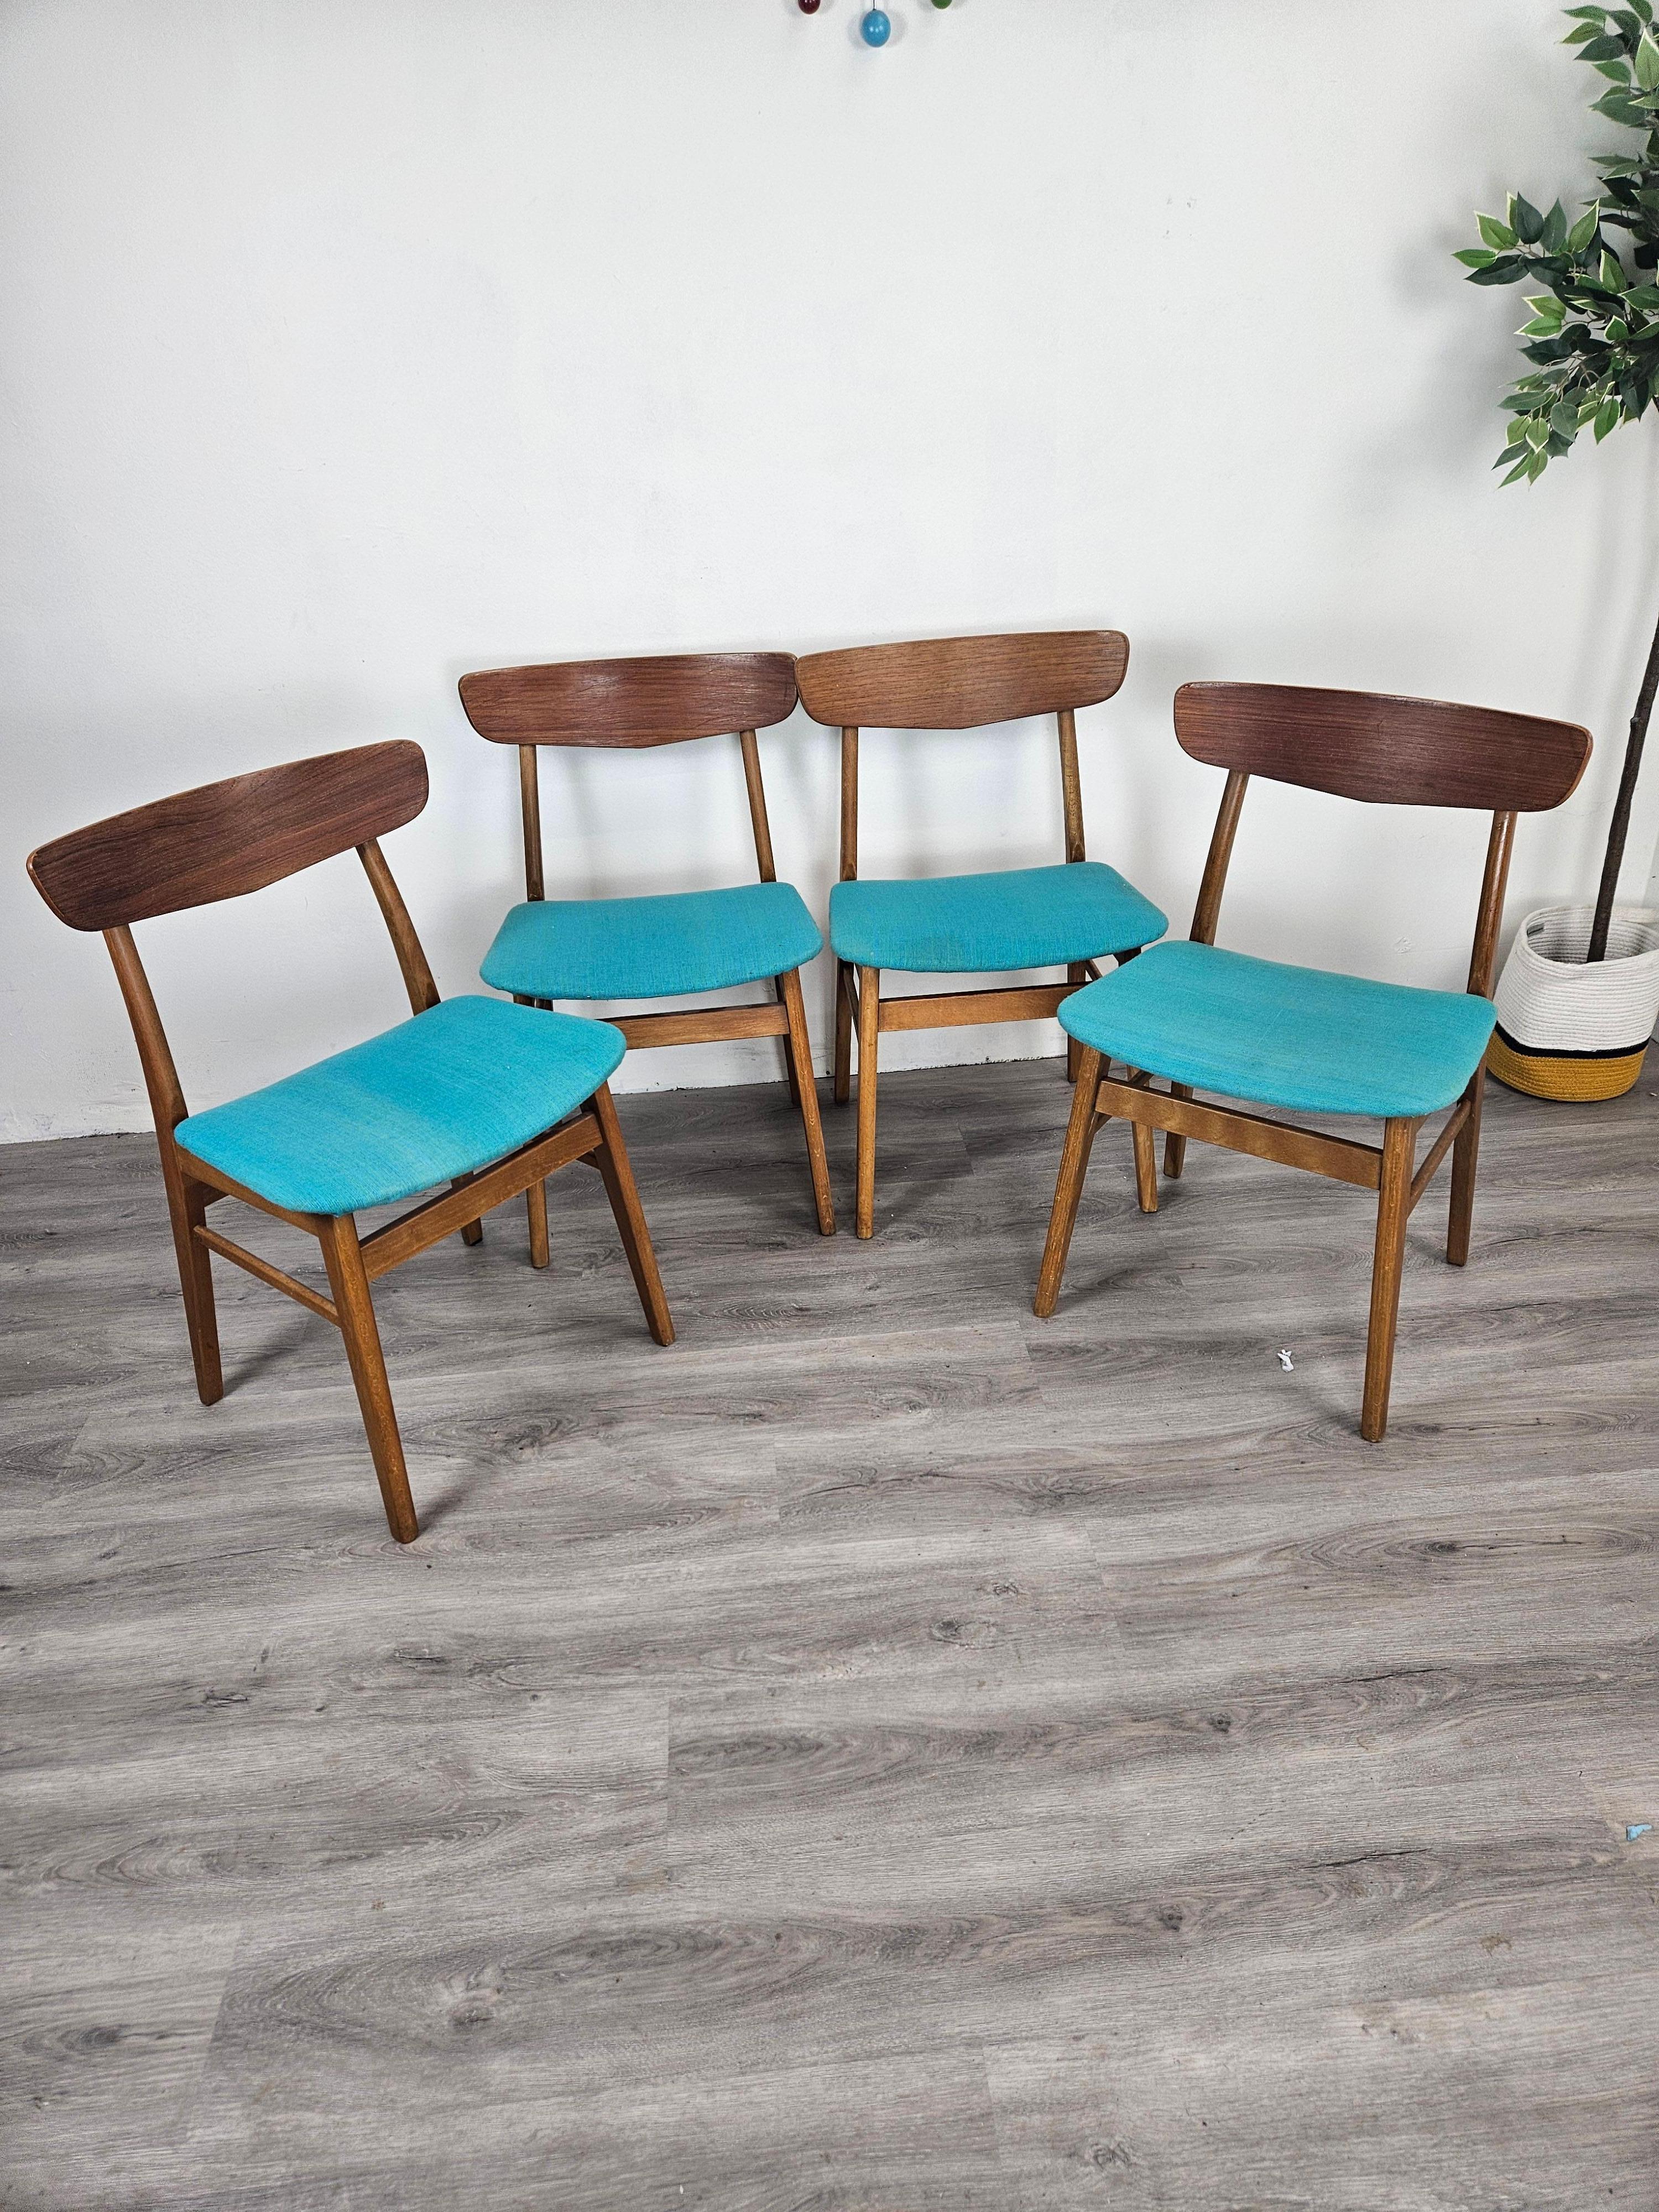 This set is four Danish dining chairs were produced by Findahls Mobelfabrik in the 1950s and 60s. This set has a beech frame and teak backrests with fabric seat covers in colorful teal. The contrast of the teak back and teal fabric is striking.
The